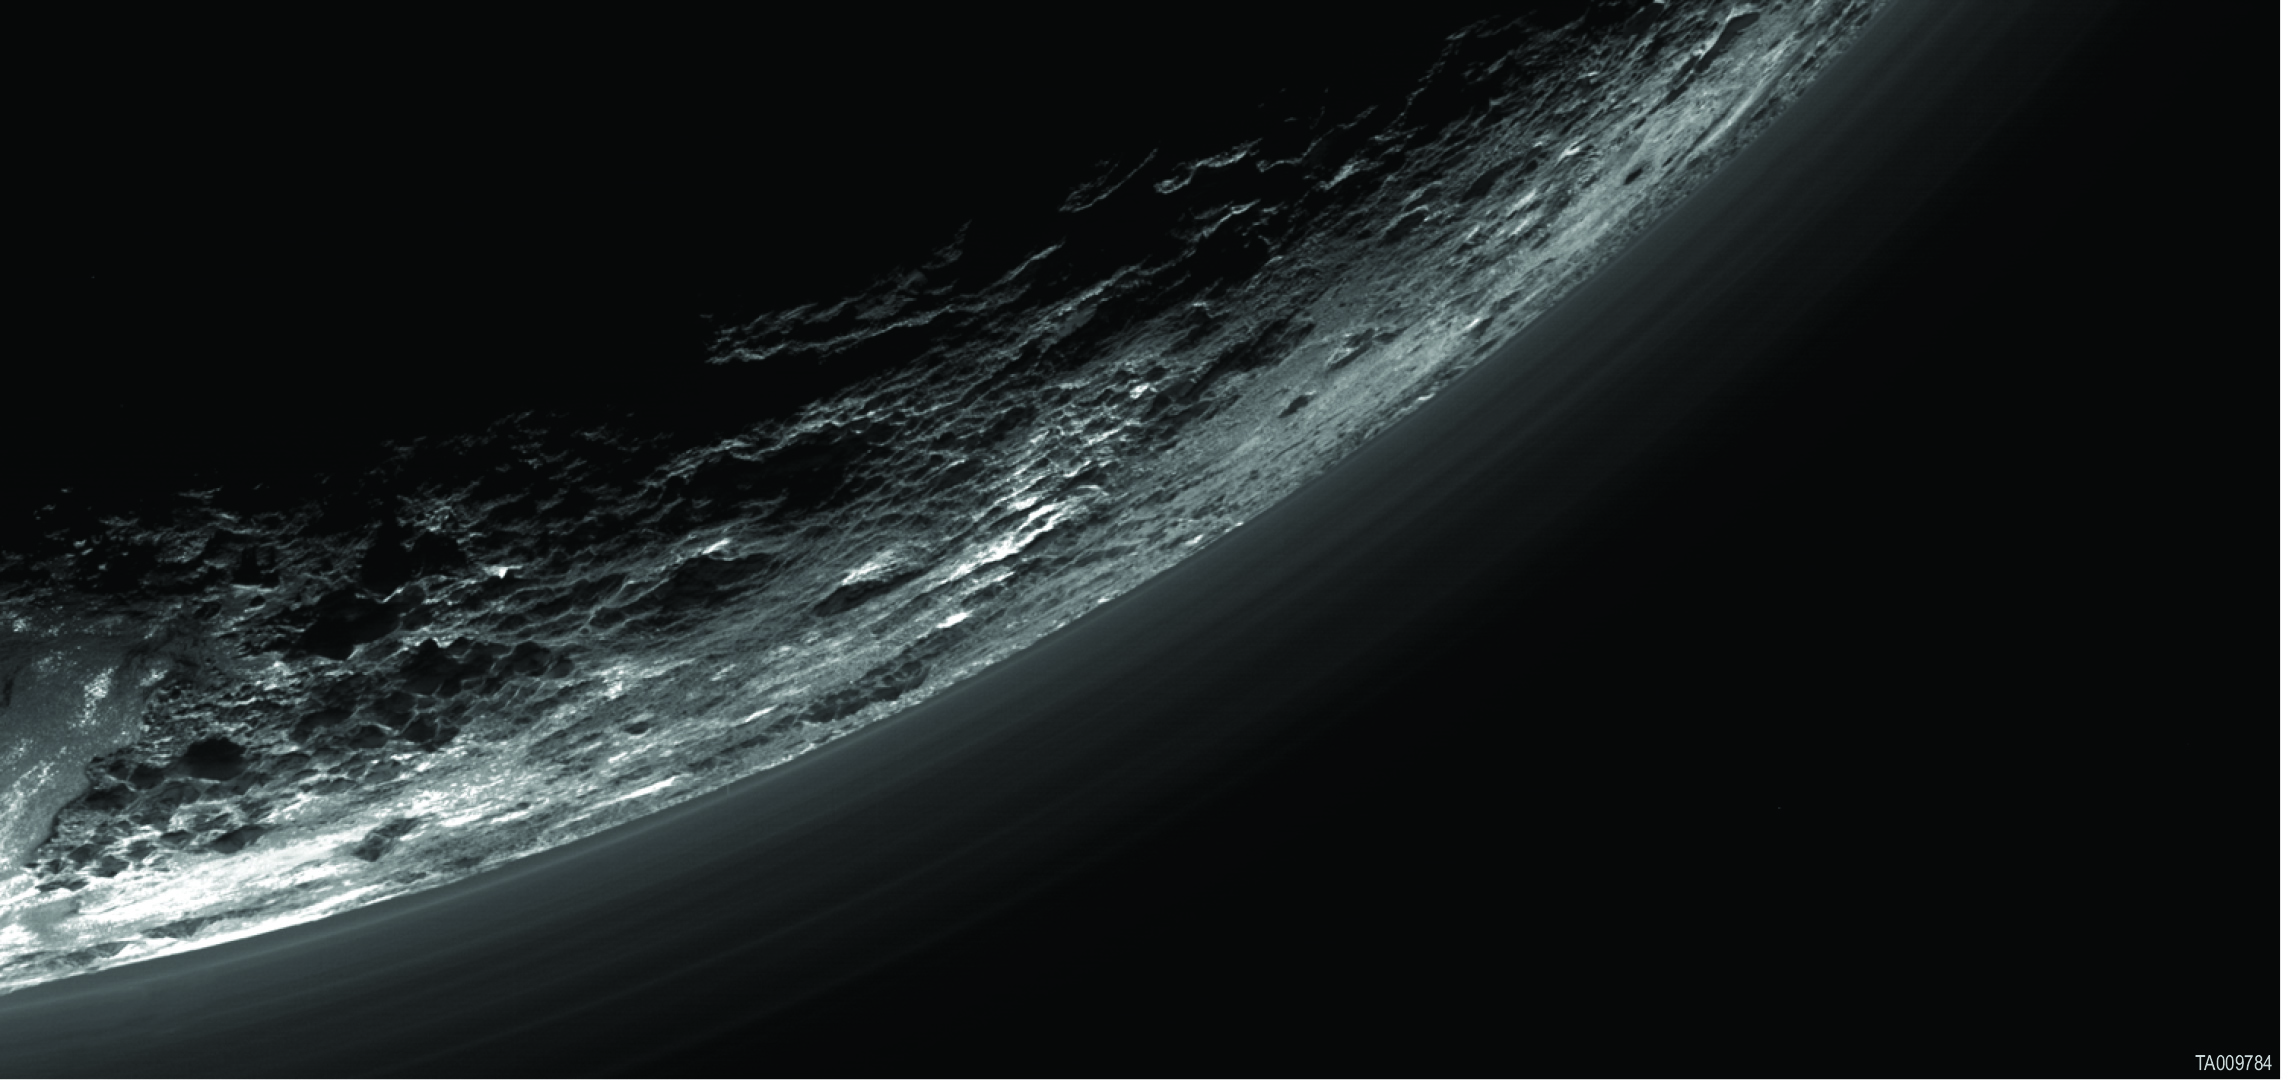 Pluto's Hazy Layers Linked to Atmospheric Gravity Waves